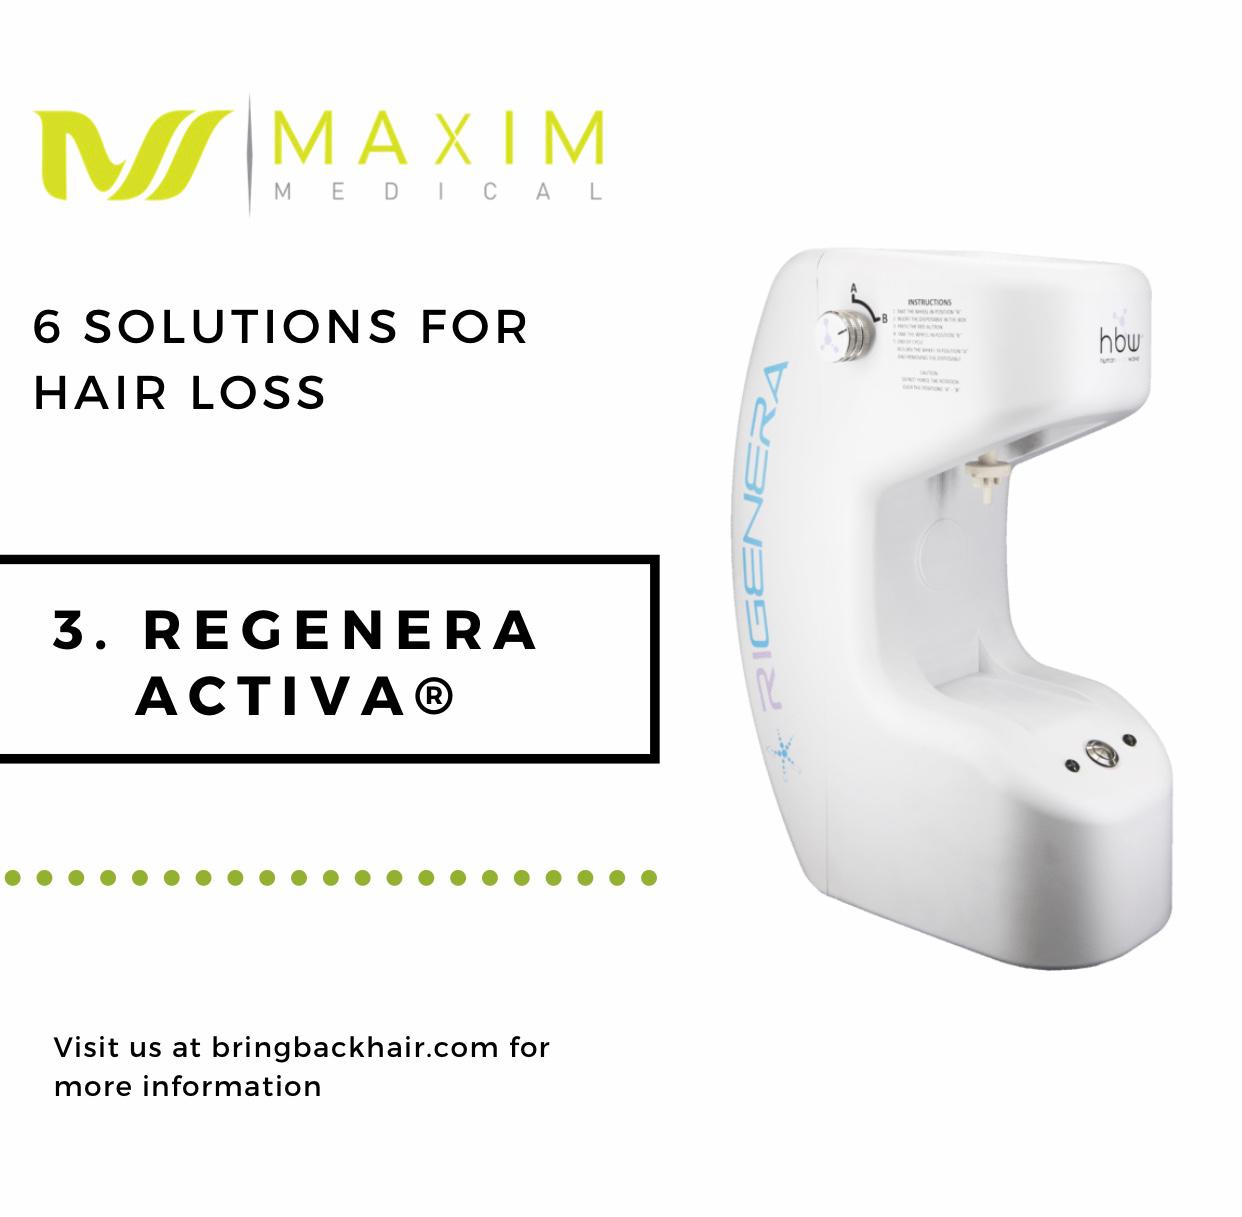 6 Solutions For Hair Loss

3. Regenera Activa
Regenera Activa is one of the newest revolutionary methods to treat male and female type hair loss. It is based on introduction of hair micrografts into the areas of hair loss. A three-step procedure that takes approximately 60 min with results may be visible as early as 30 days. It uses your own hair that contains cells to activate the follicles around the balding area. Thus, it uses your own body’s ability to create new hair.

Full article on our website: